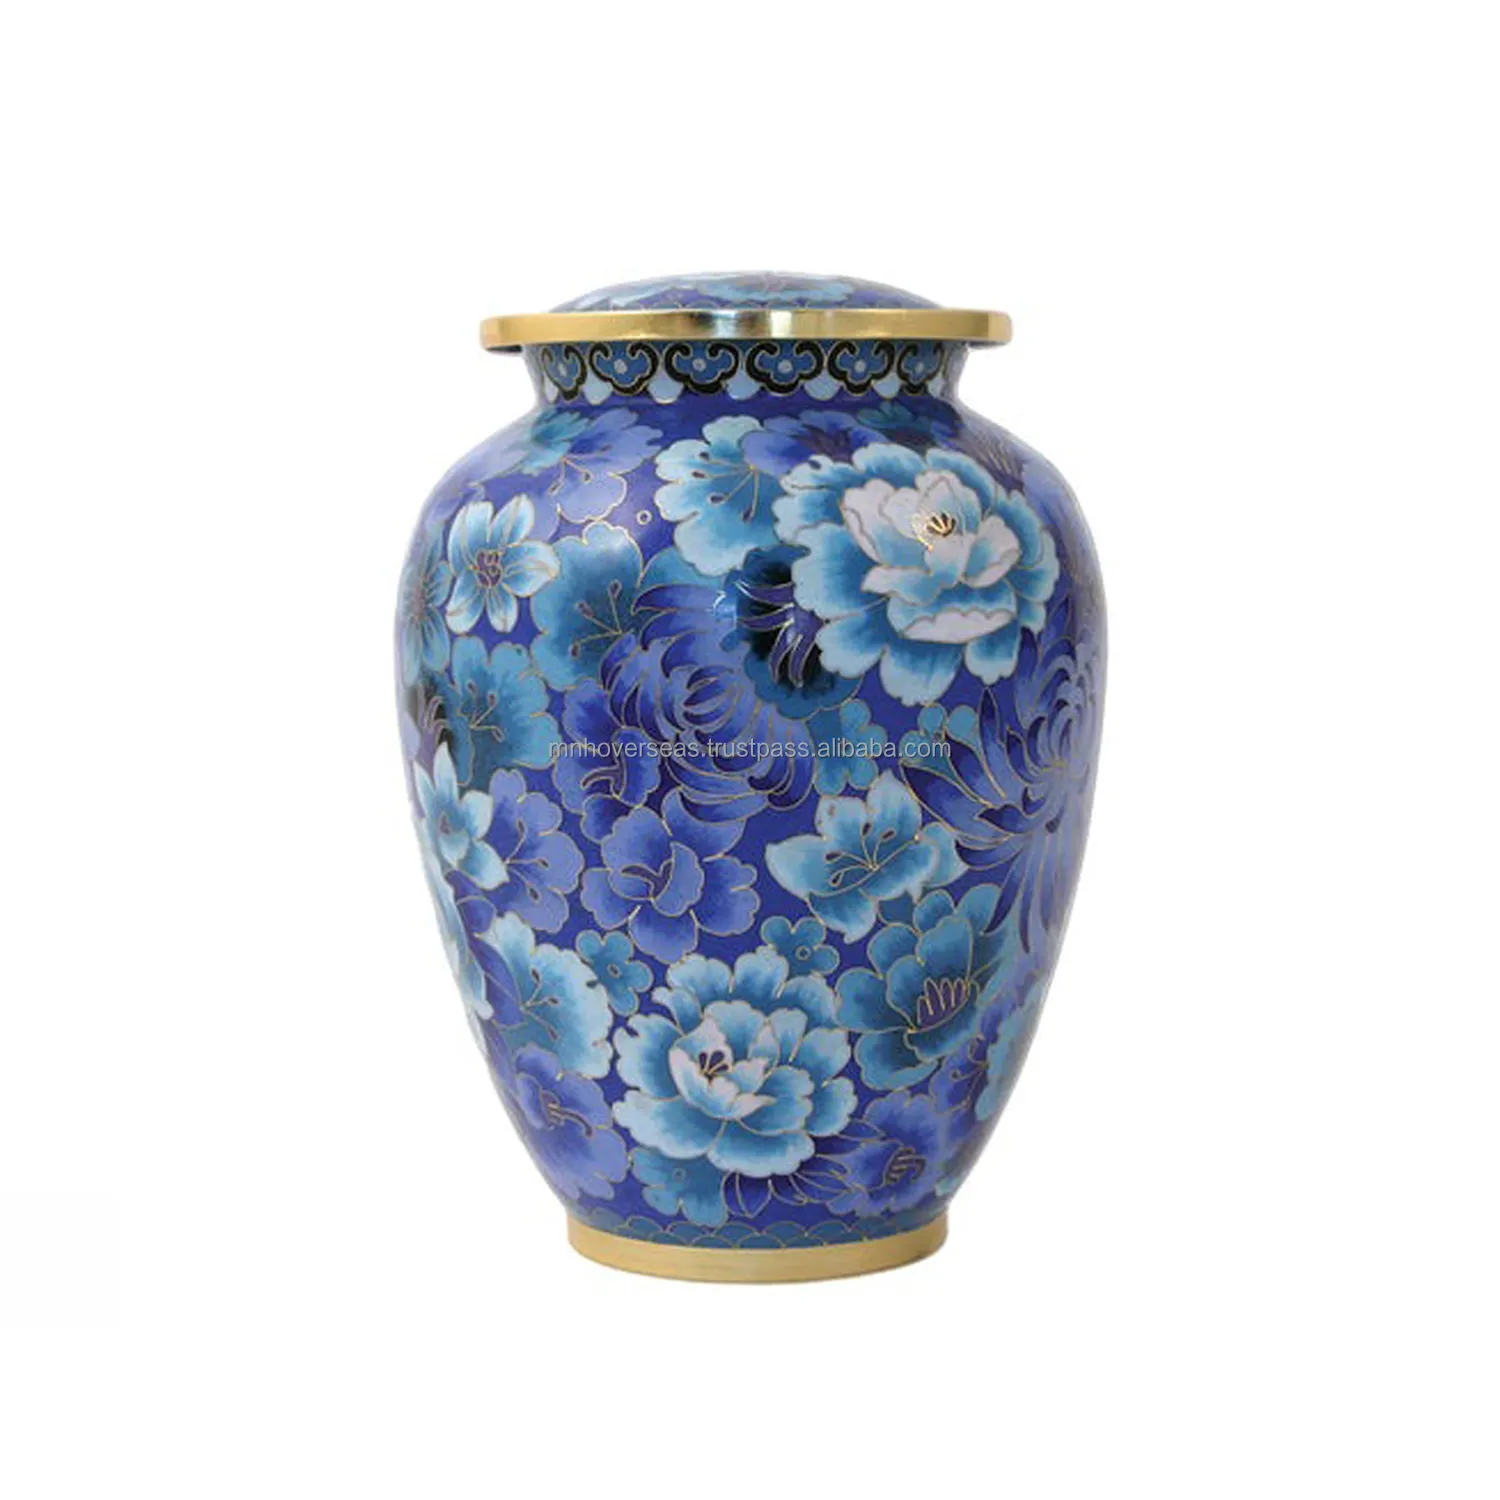 Wholesale Price Premium Quality Durable Aluminum Material Adult Funeral / Cremation Urns from India